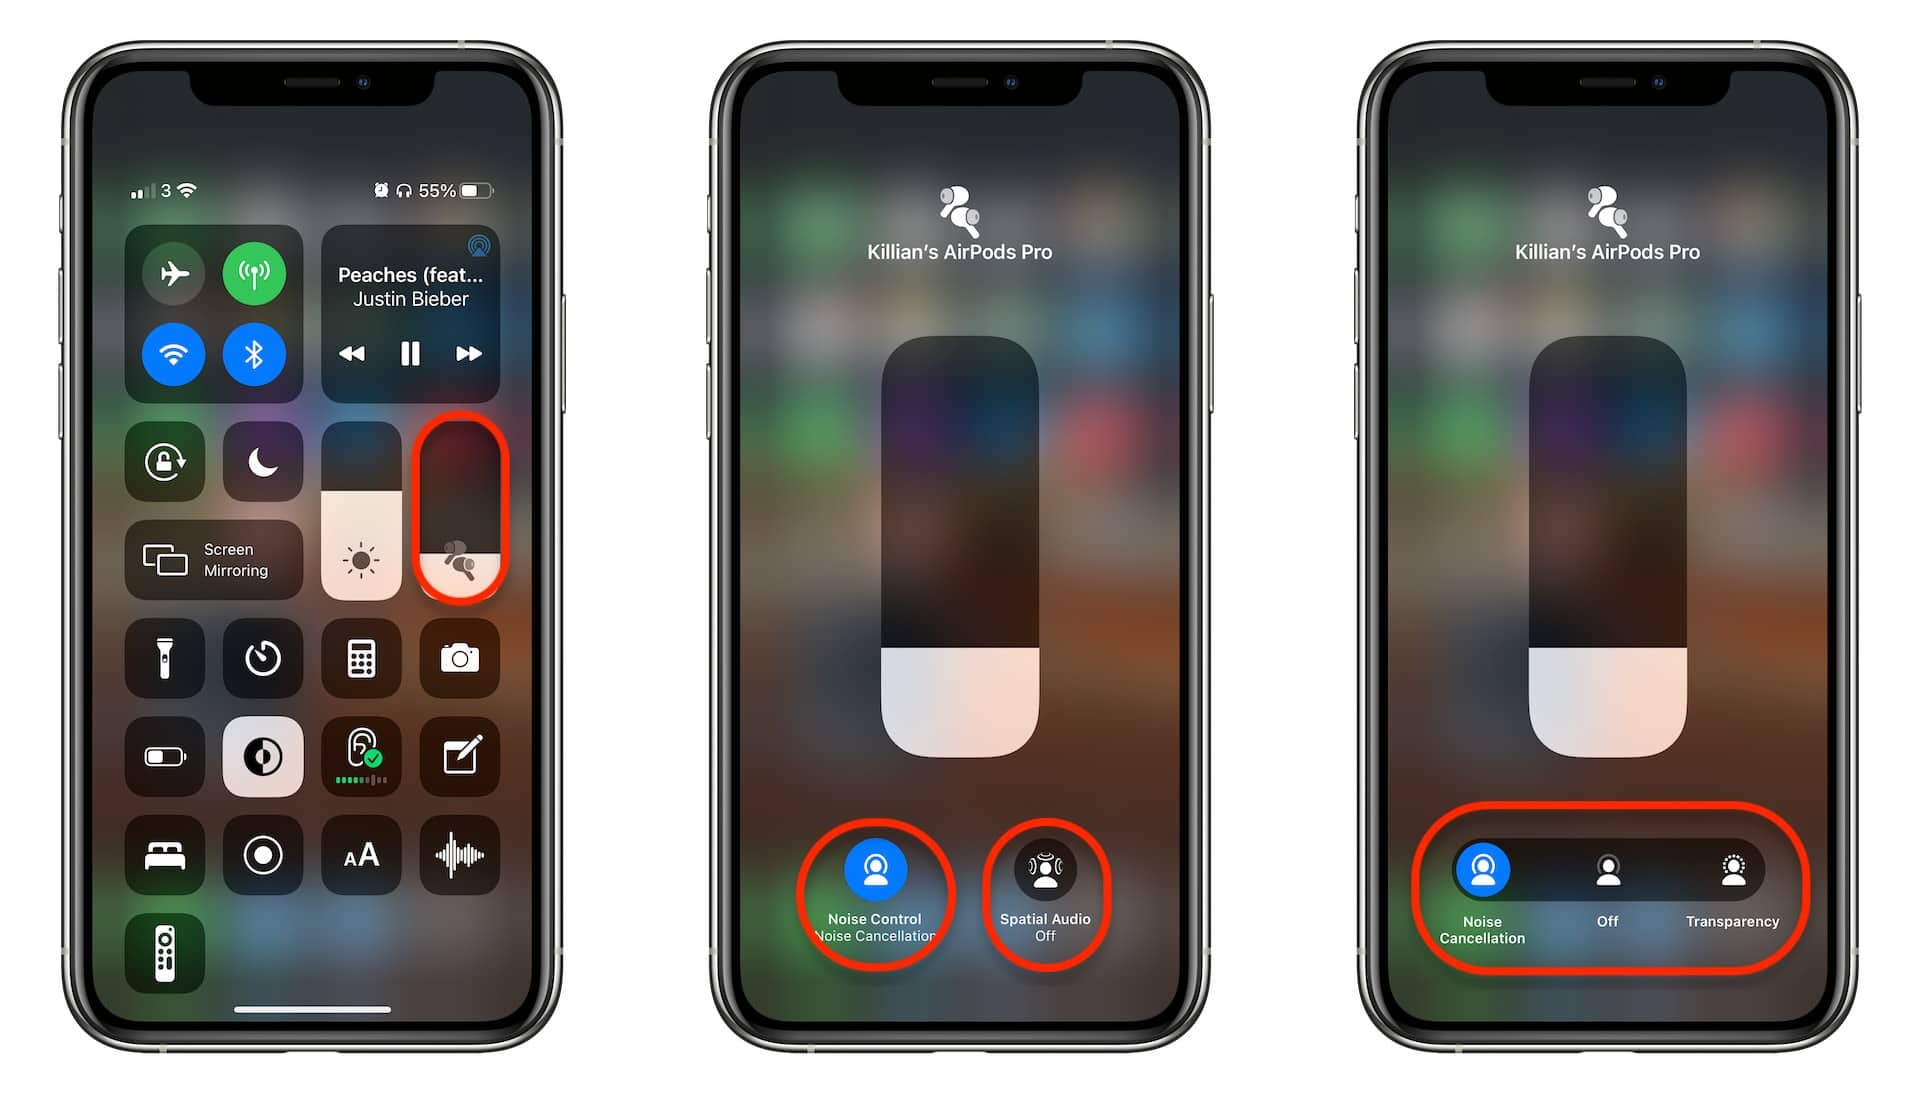 Switch AirPods audio modes in Control Center